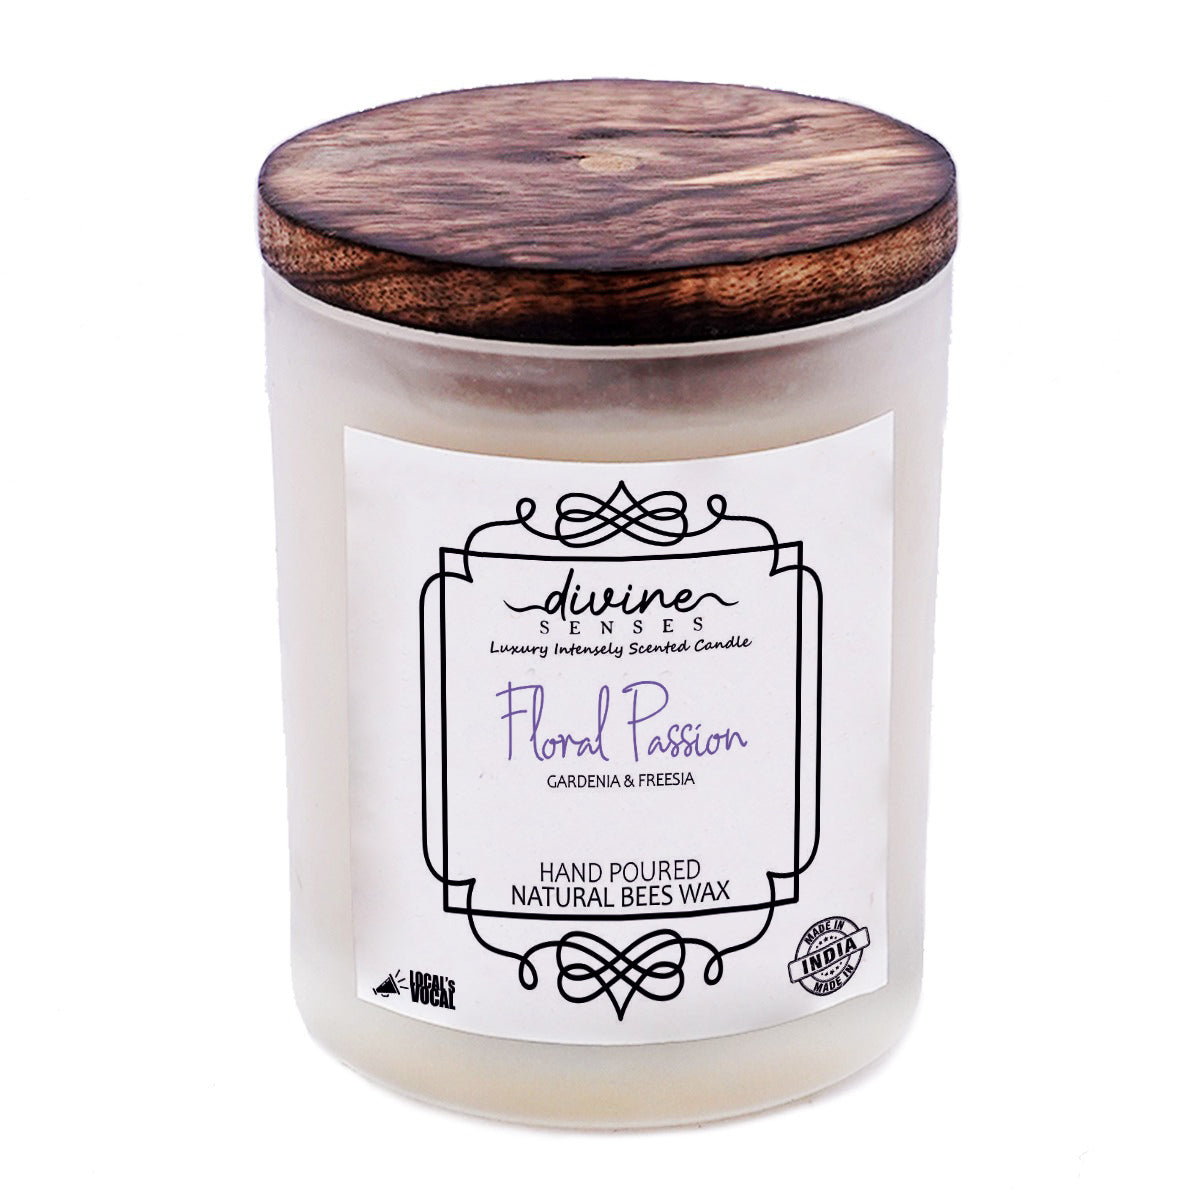 Gardenia & Freesia Intensely Scented Natural Beeswax Candle